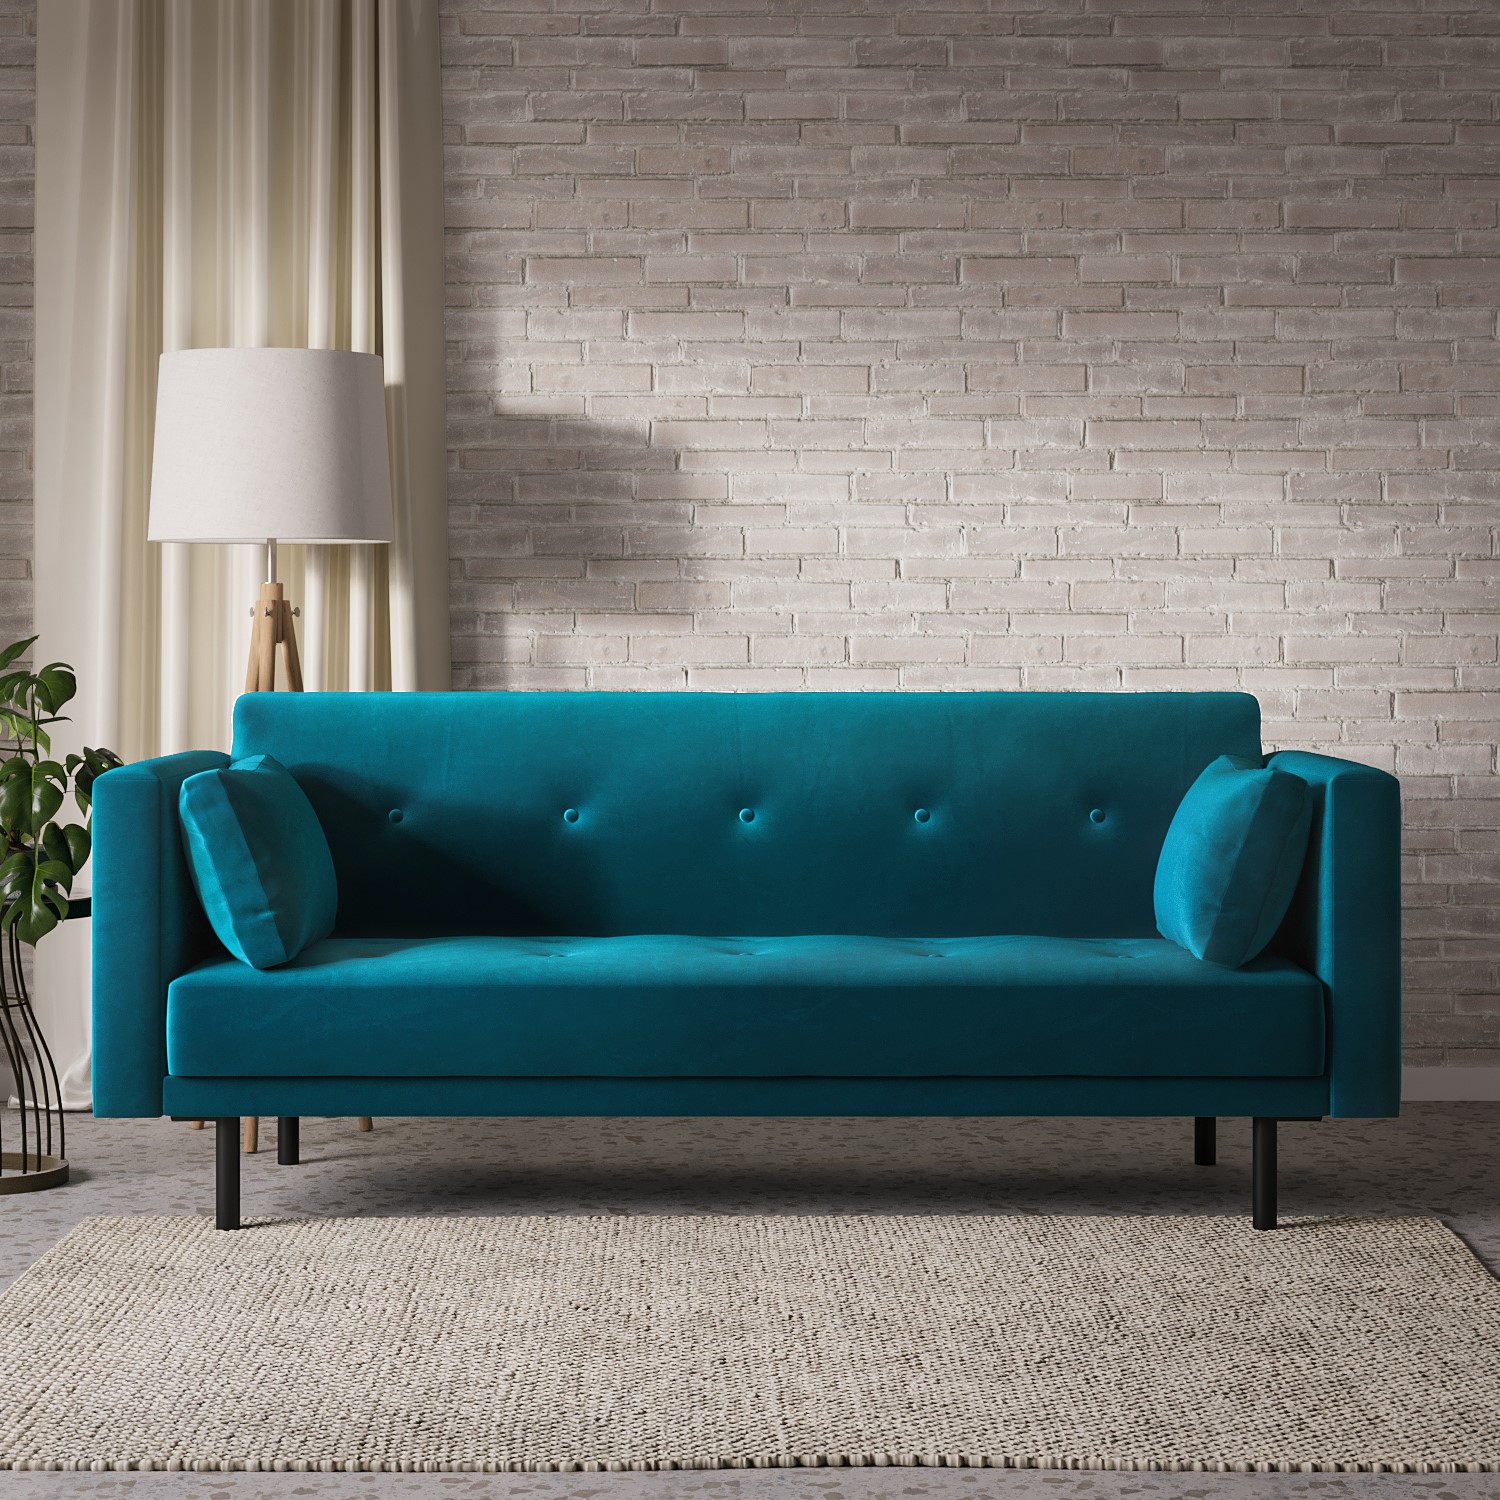 Photo of Teal velvet click clack sofa bed - seats 3 - rory